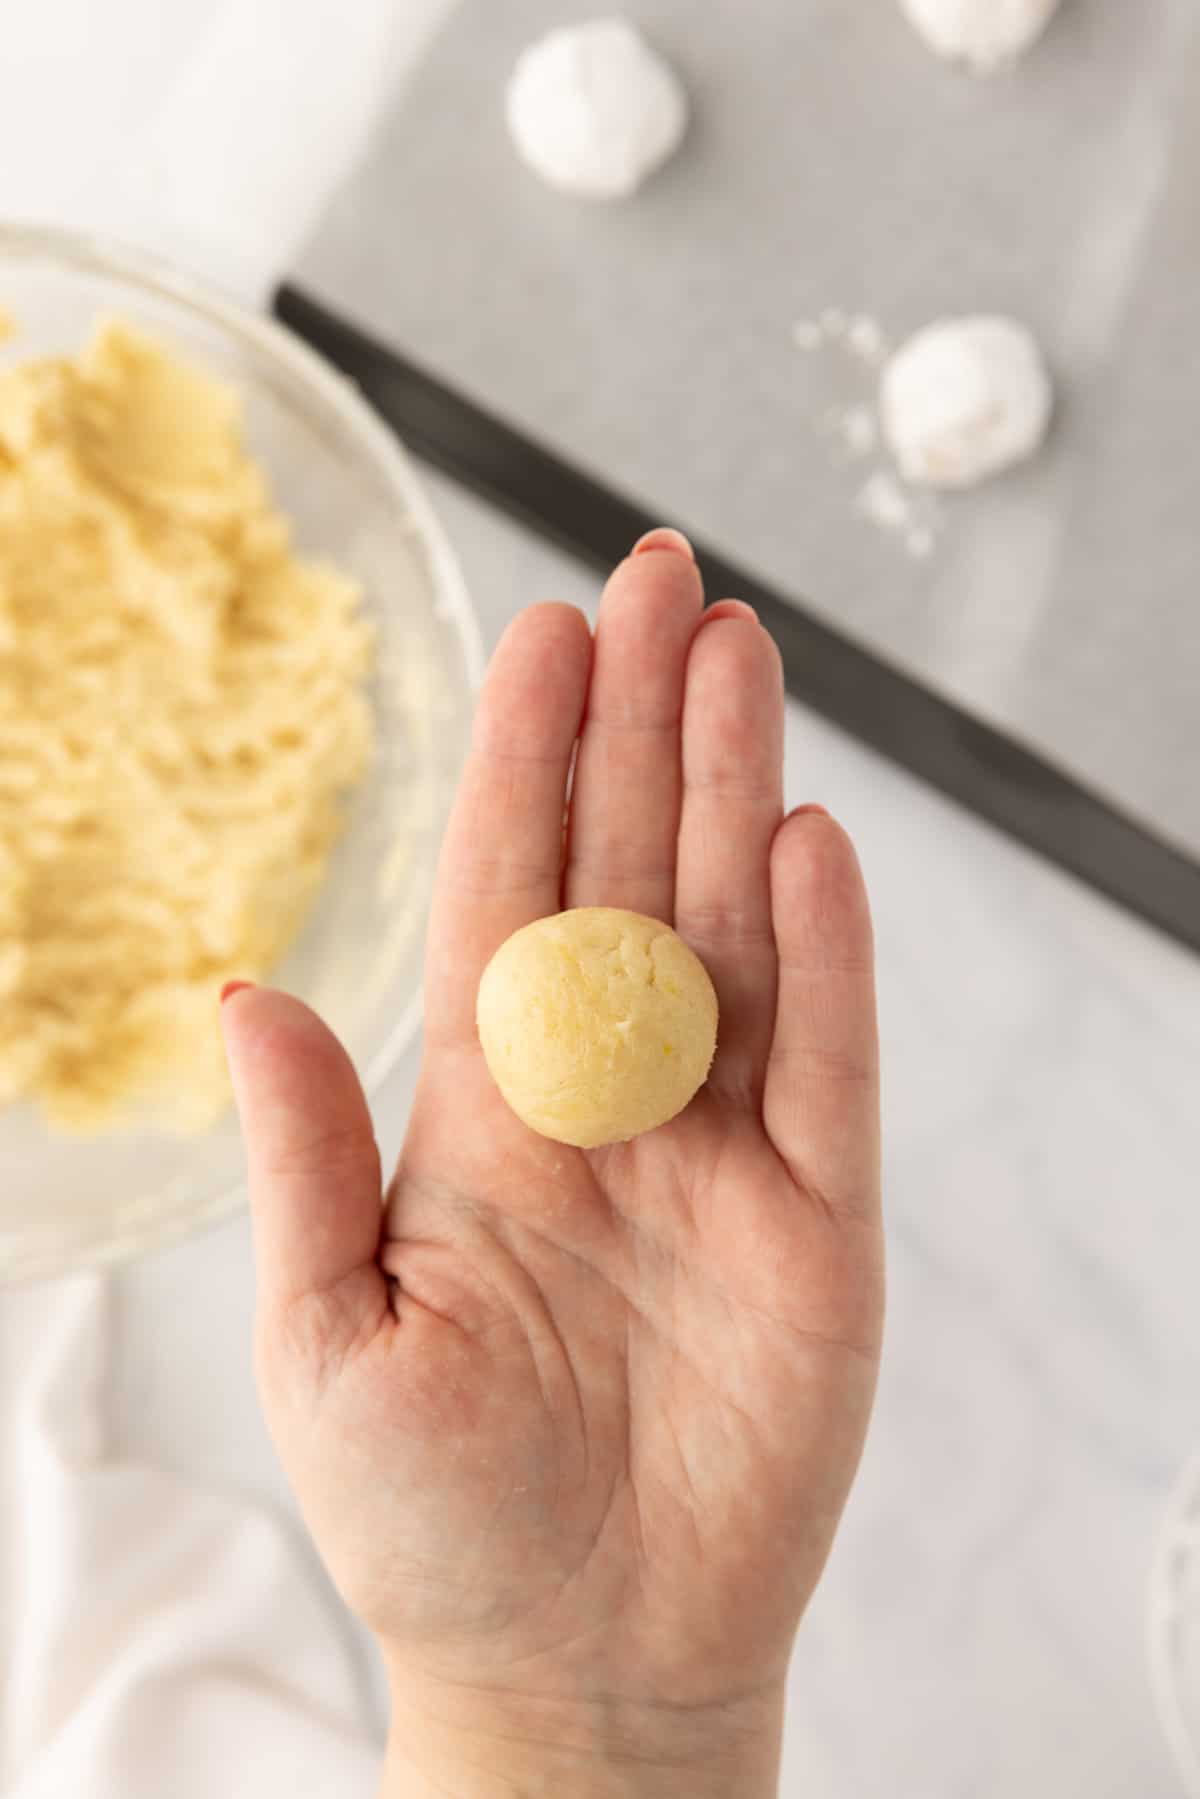 A lemon crinkle cookie dough ball in a hand.